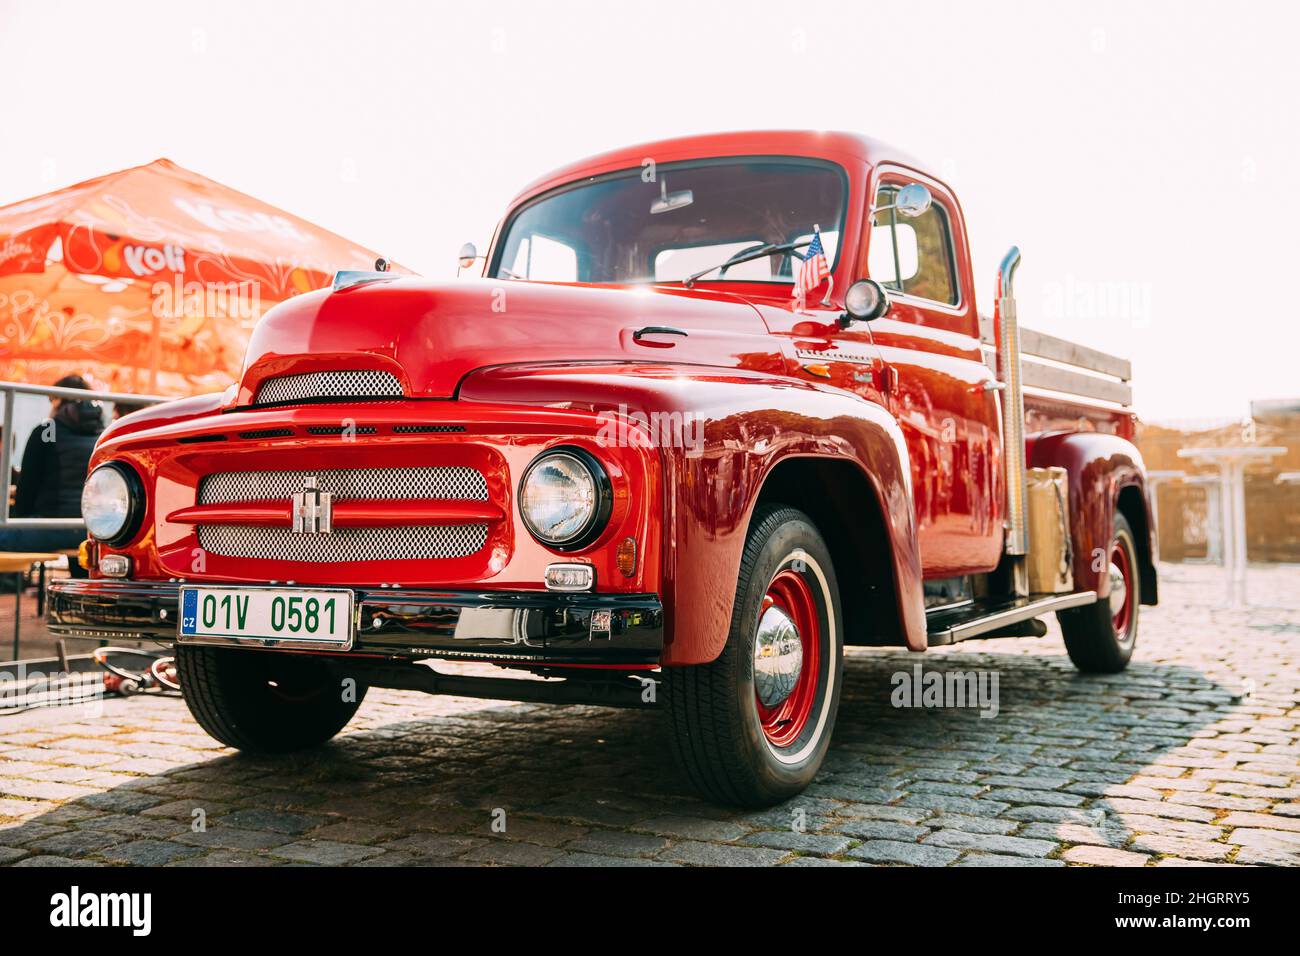 Front View Of Red International Harvester R-series Truck Parked In Street. Stock Photo